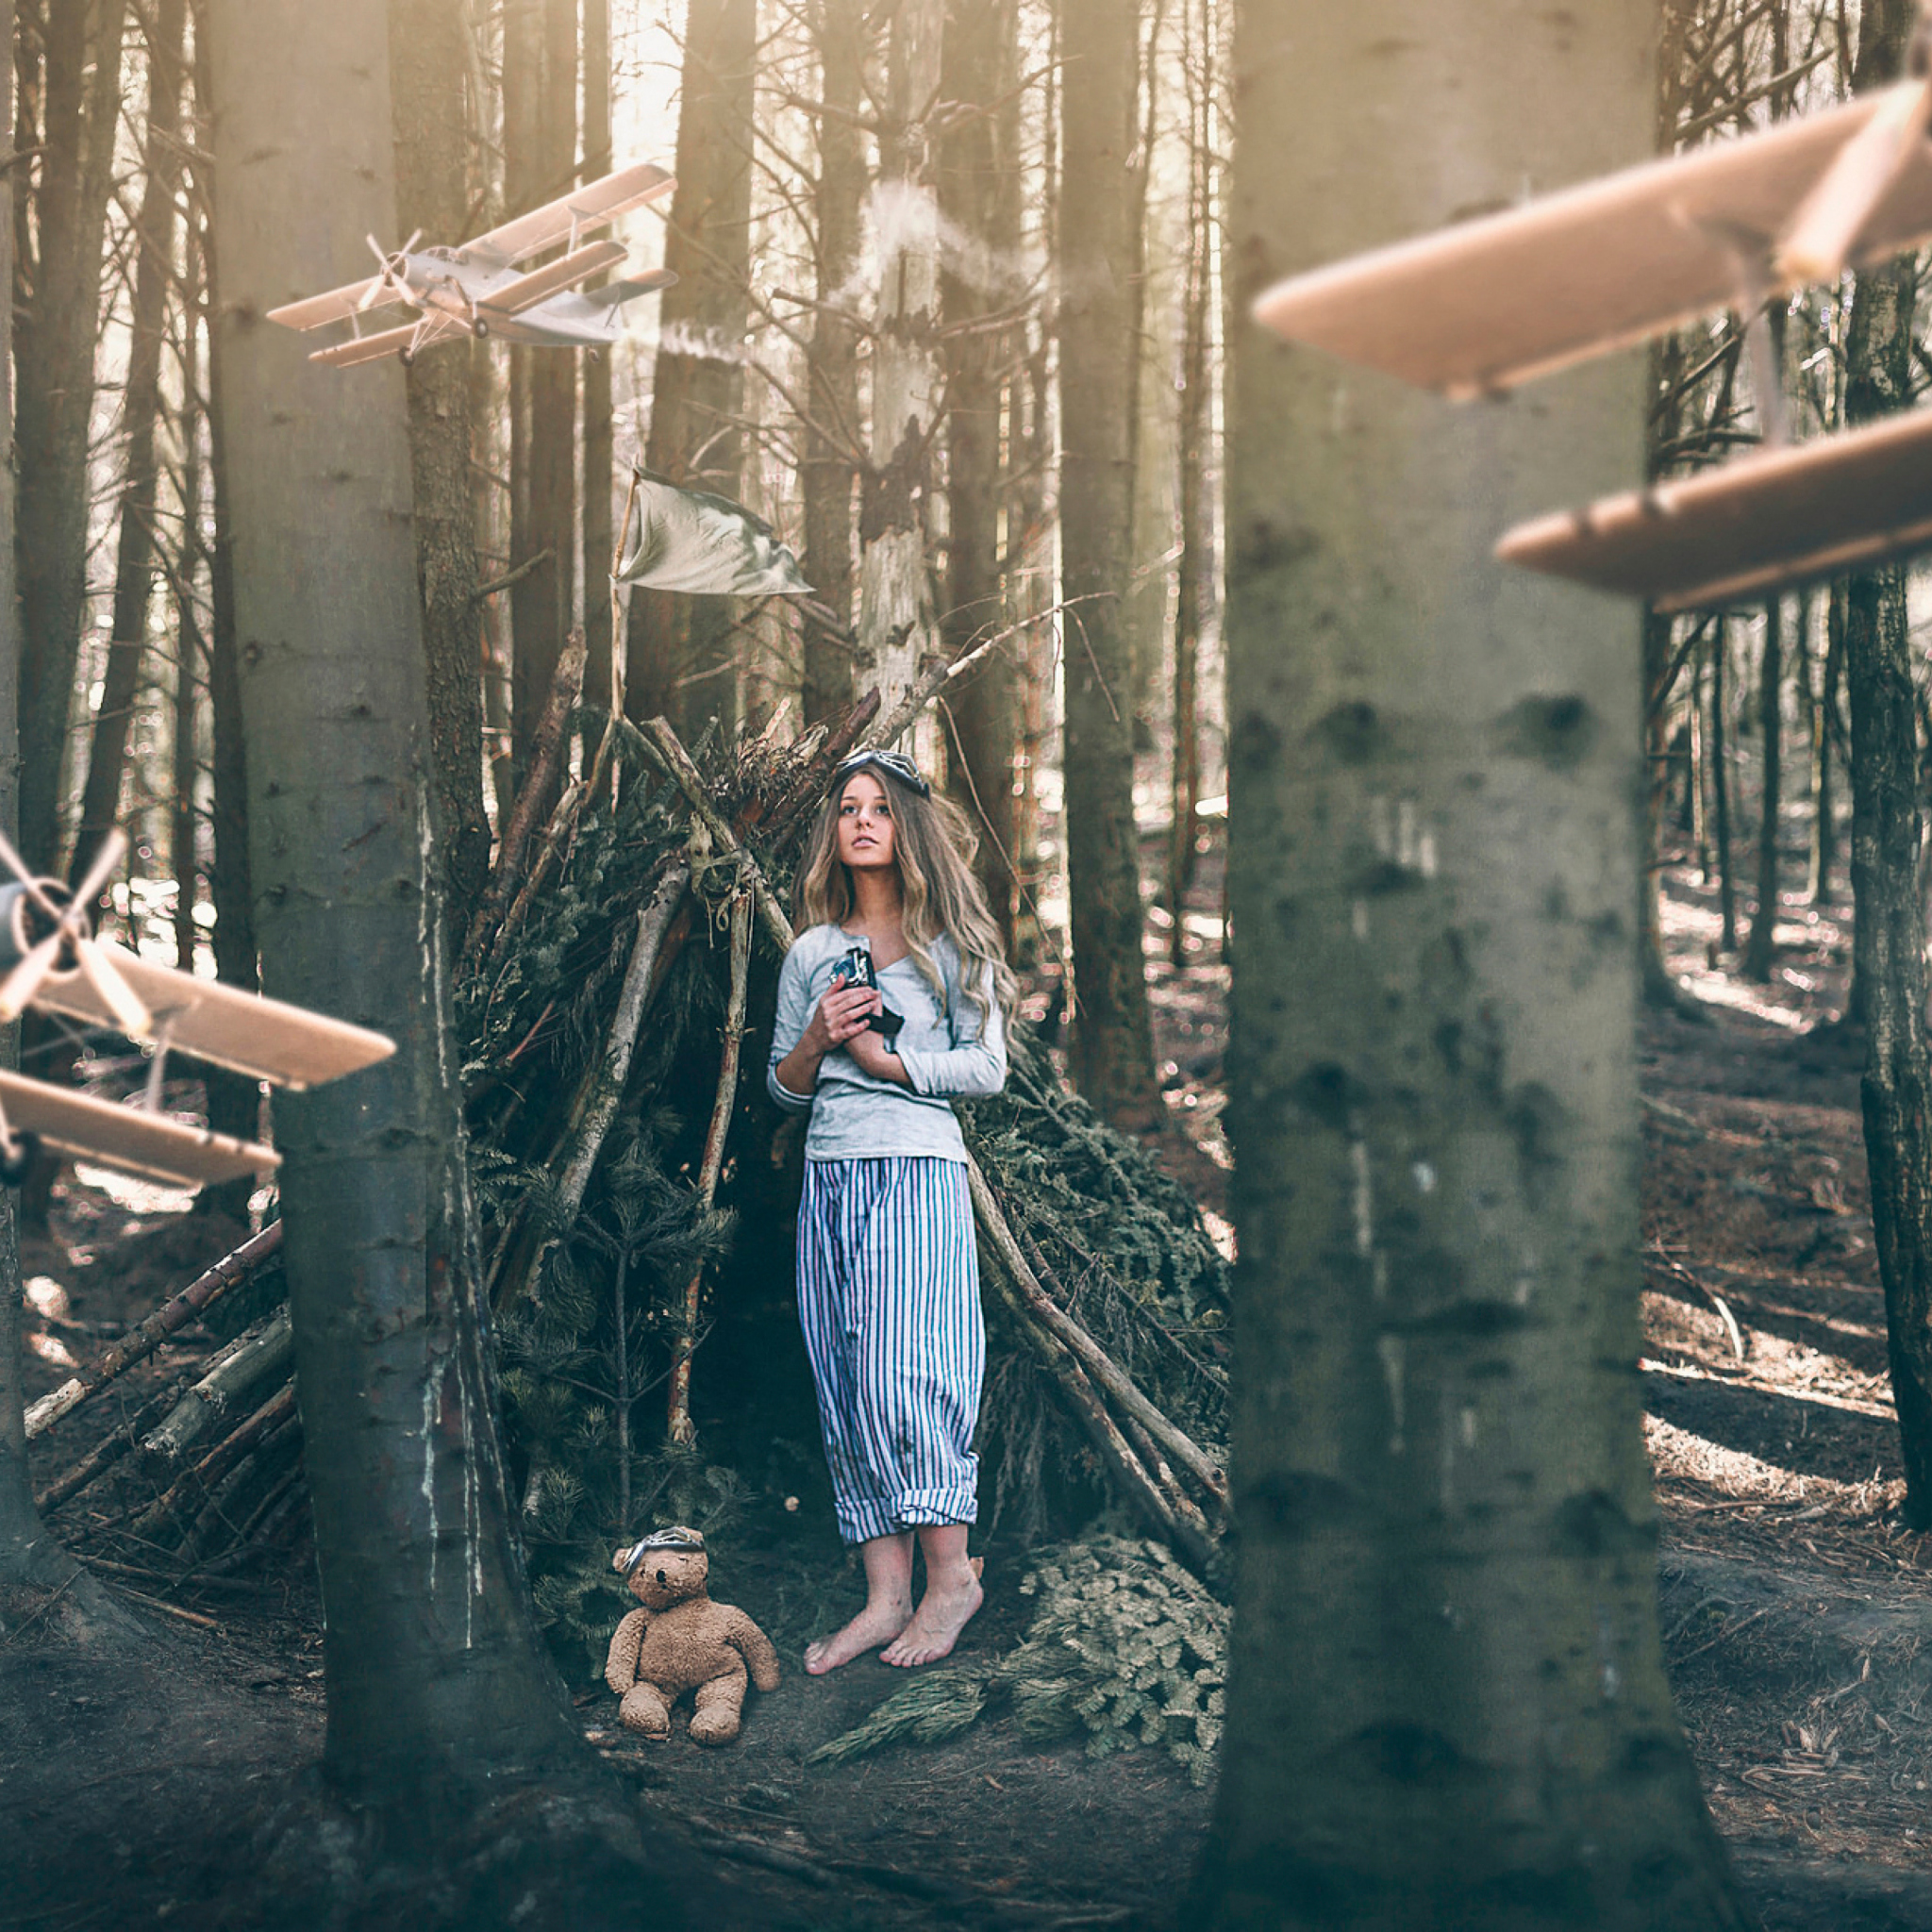 Girl And Teddy Bear In Forest By Rosie Hardy screenshot #1 2048x2048